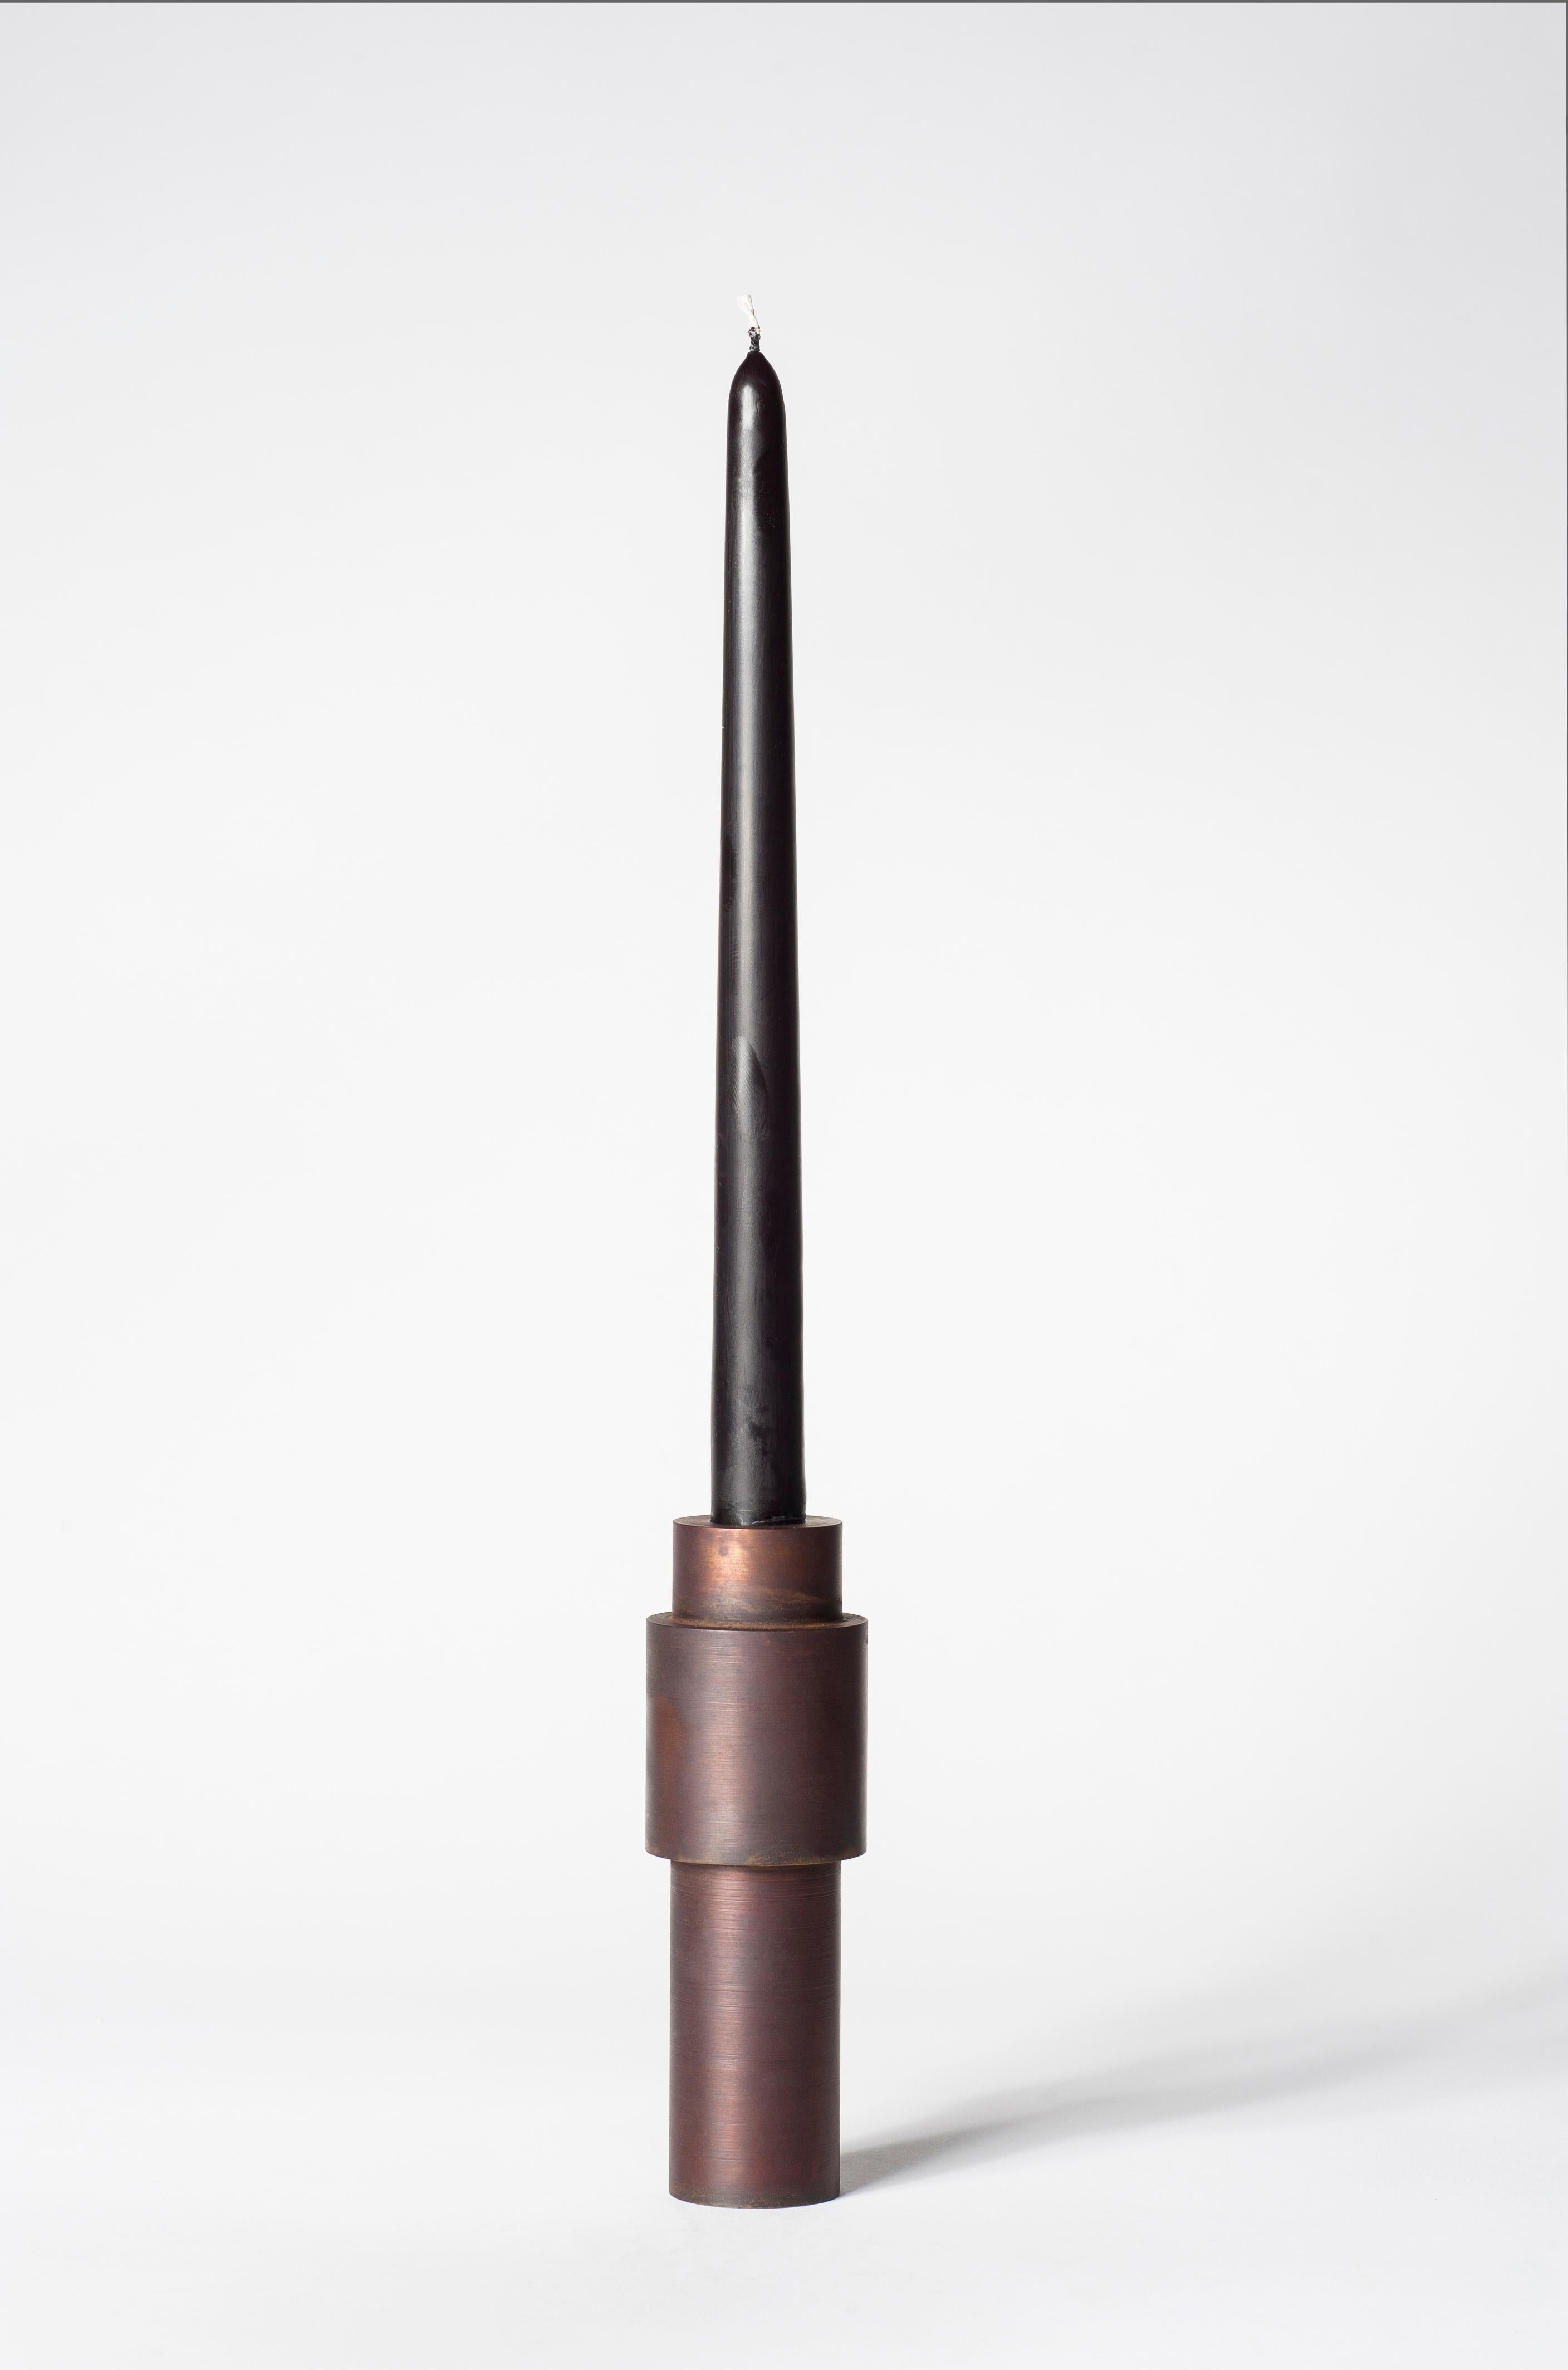 Brown patina steel candlestick by Lukasz Friedrich
Dimensions: D 5 x H 15 cm
Materials: Brown patina on steel.